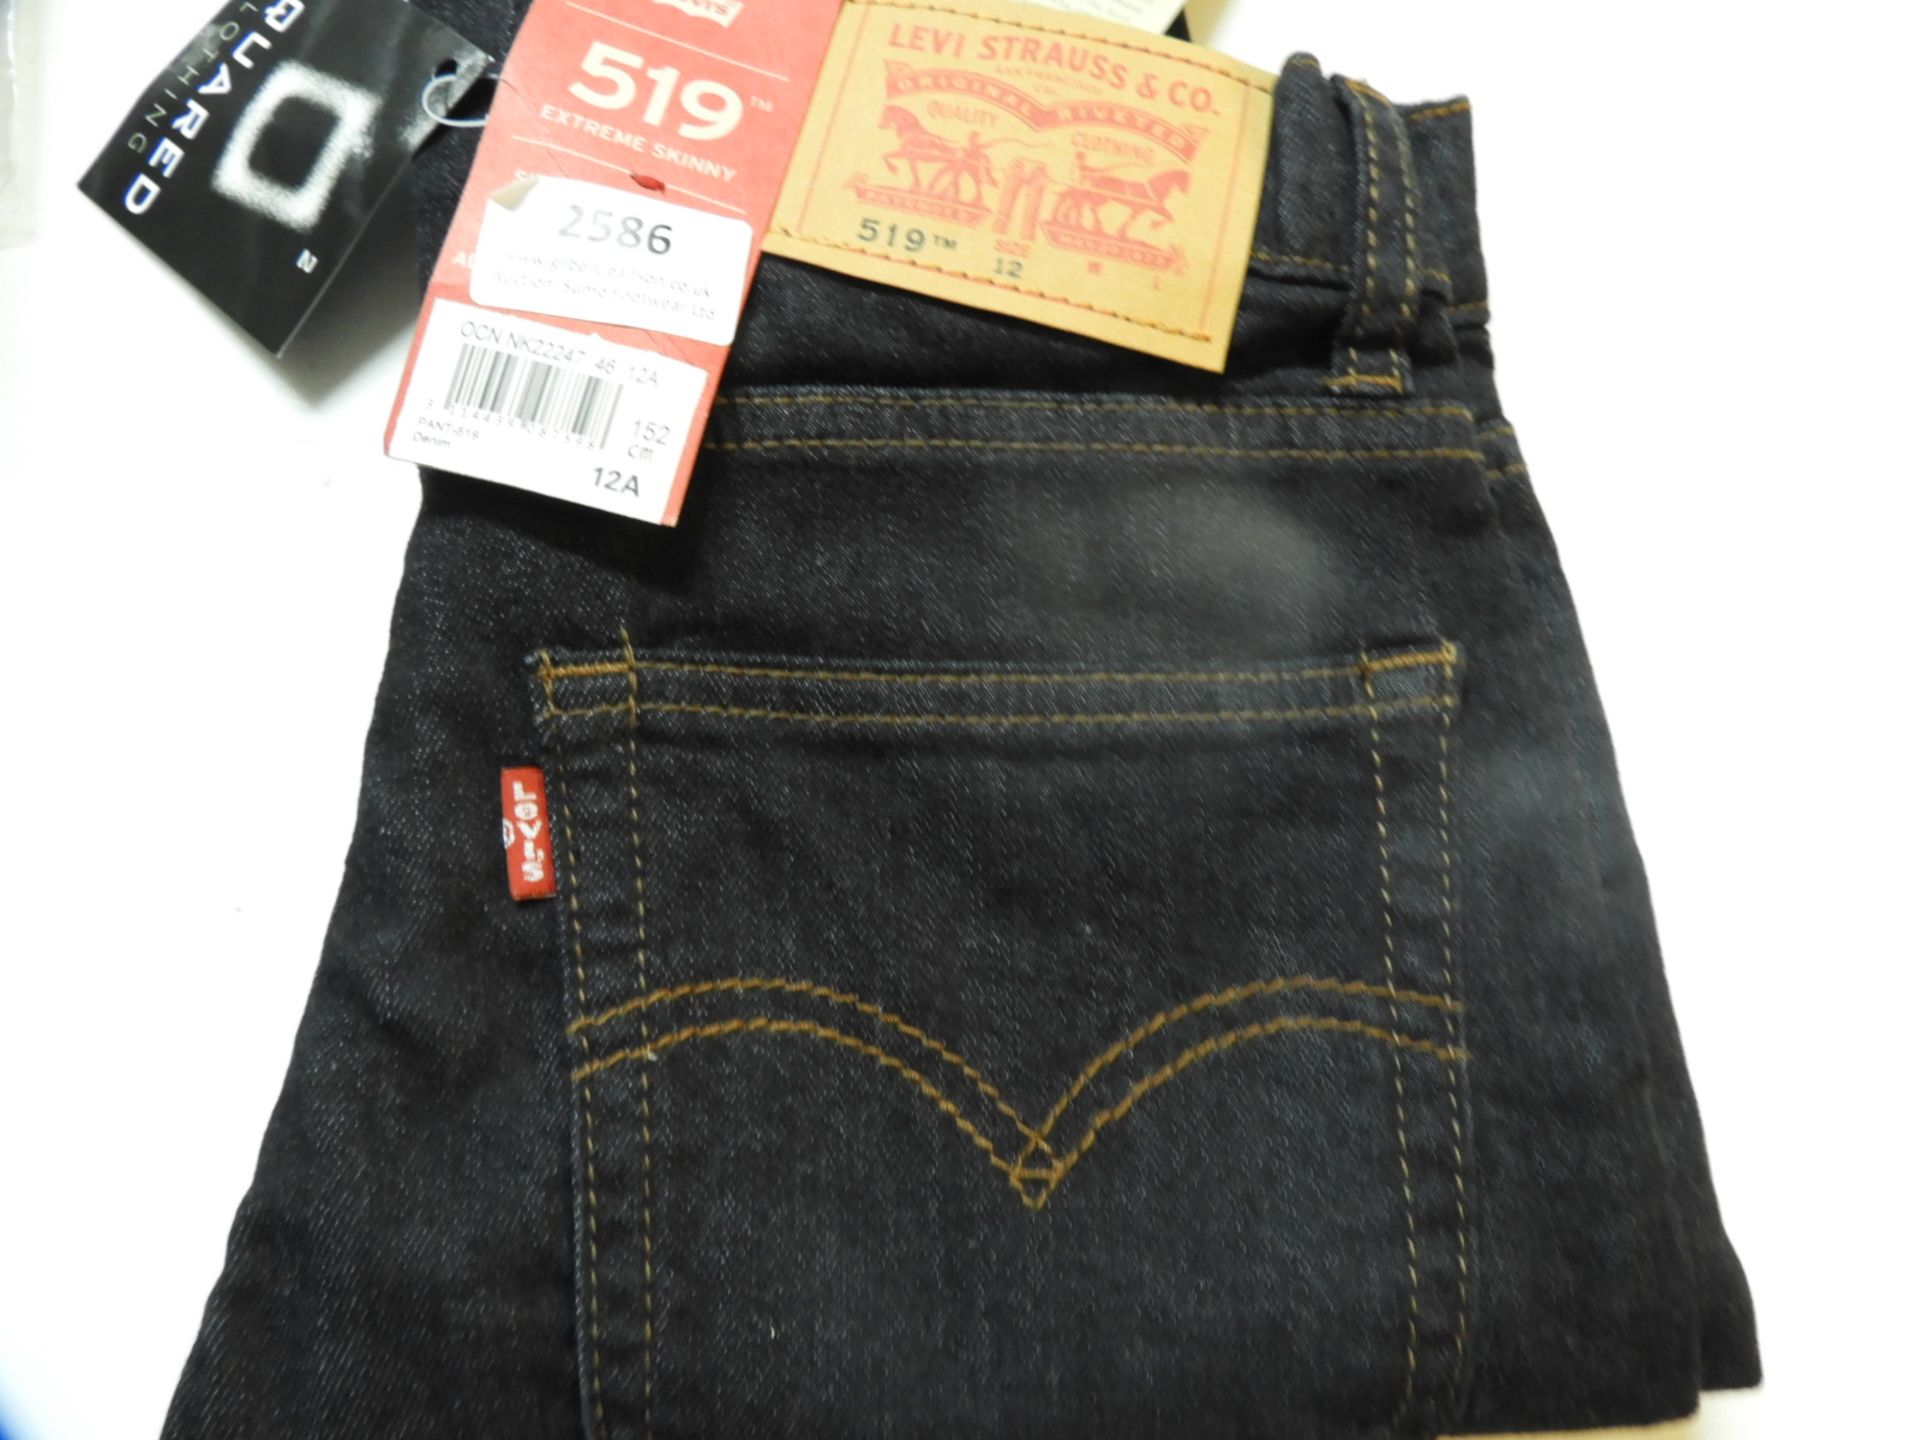 Levi 519 Children's Jeans Size: 12 Years